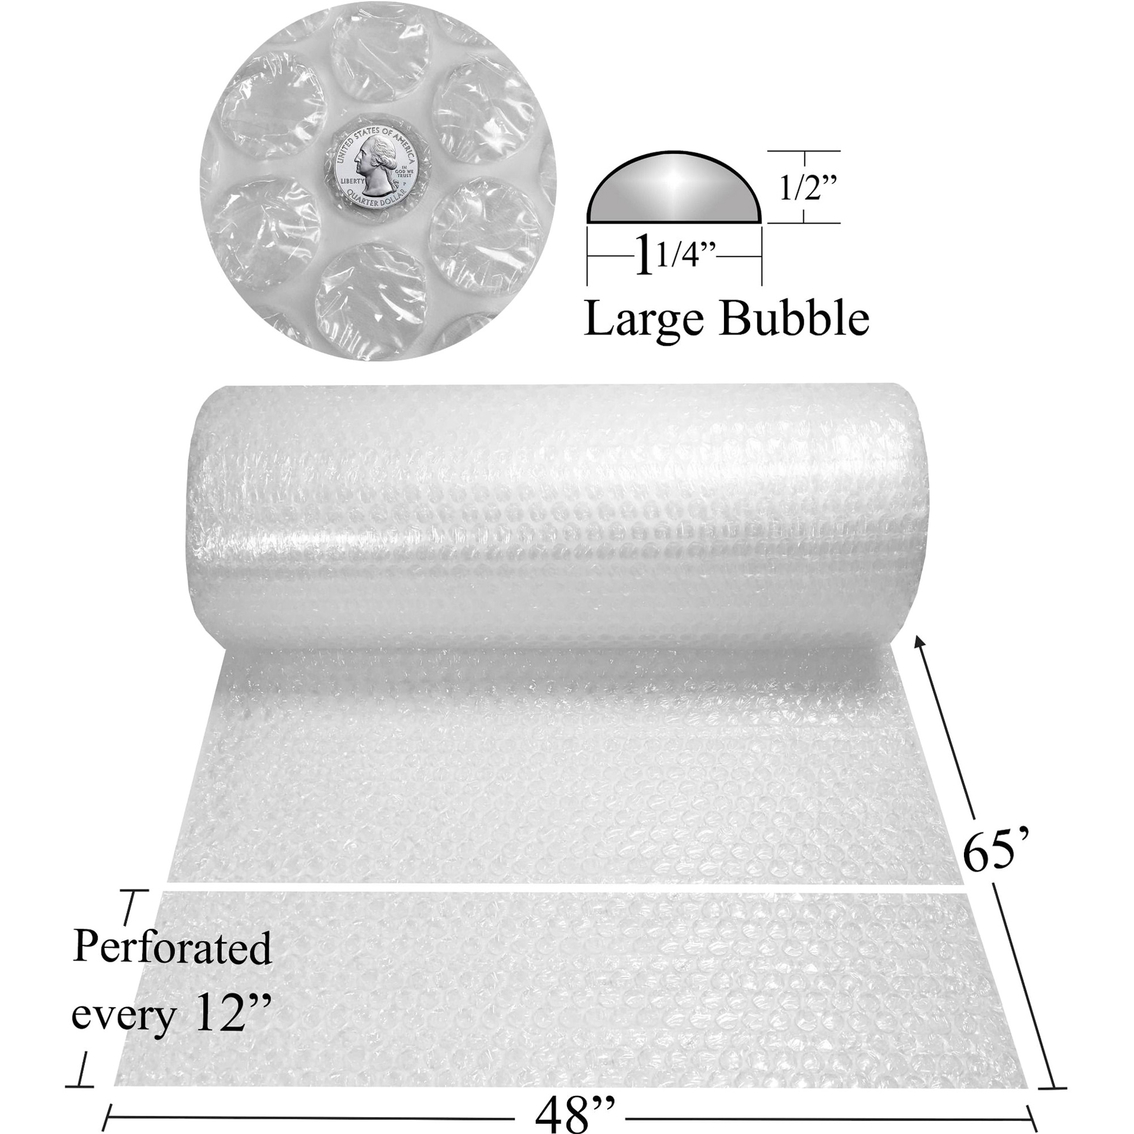 uBoxes Bubble Roll Wrap 48 in. Wide x 65 ft. Large Bubbles - Image 2 of 2